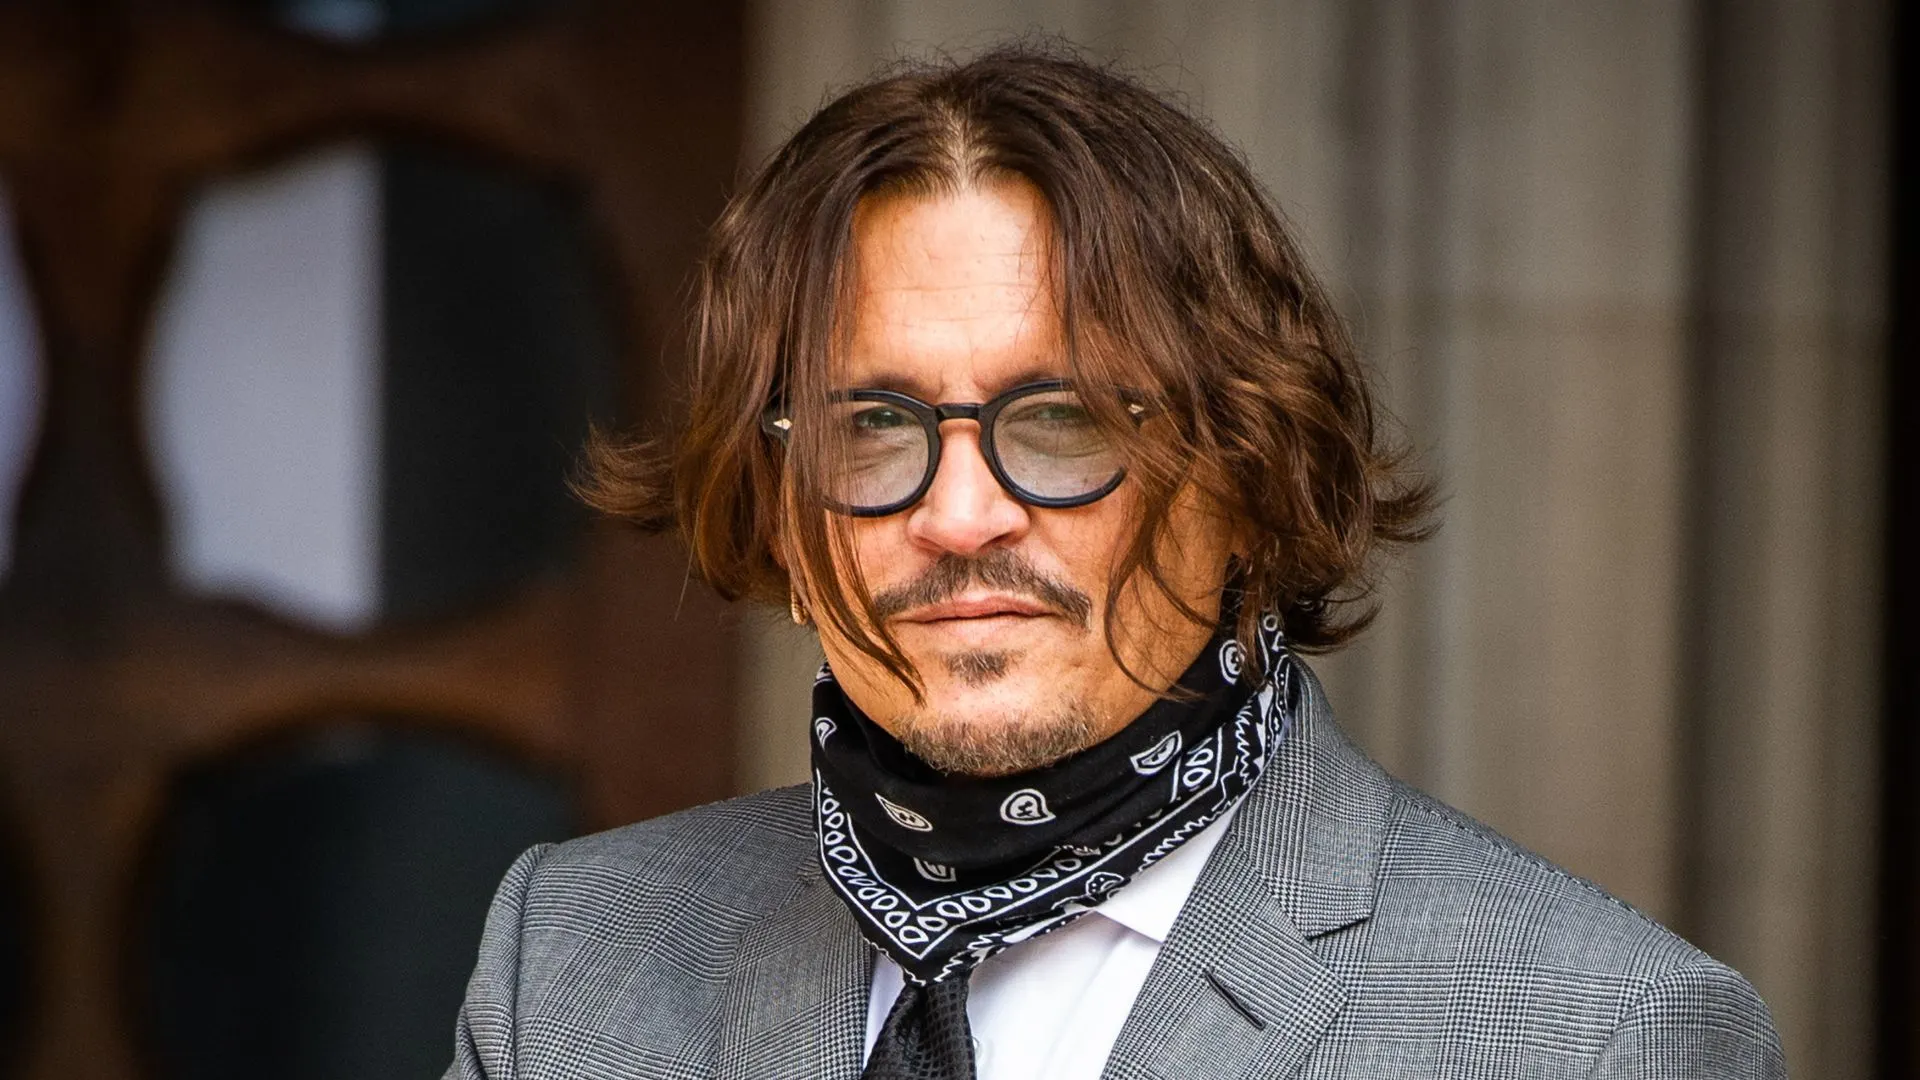 Johnny Depp Phone Number, WhatsApp Number, House Address, Email Id, Contacts